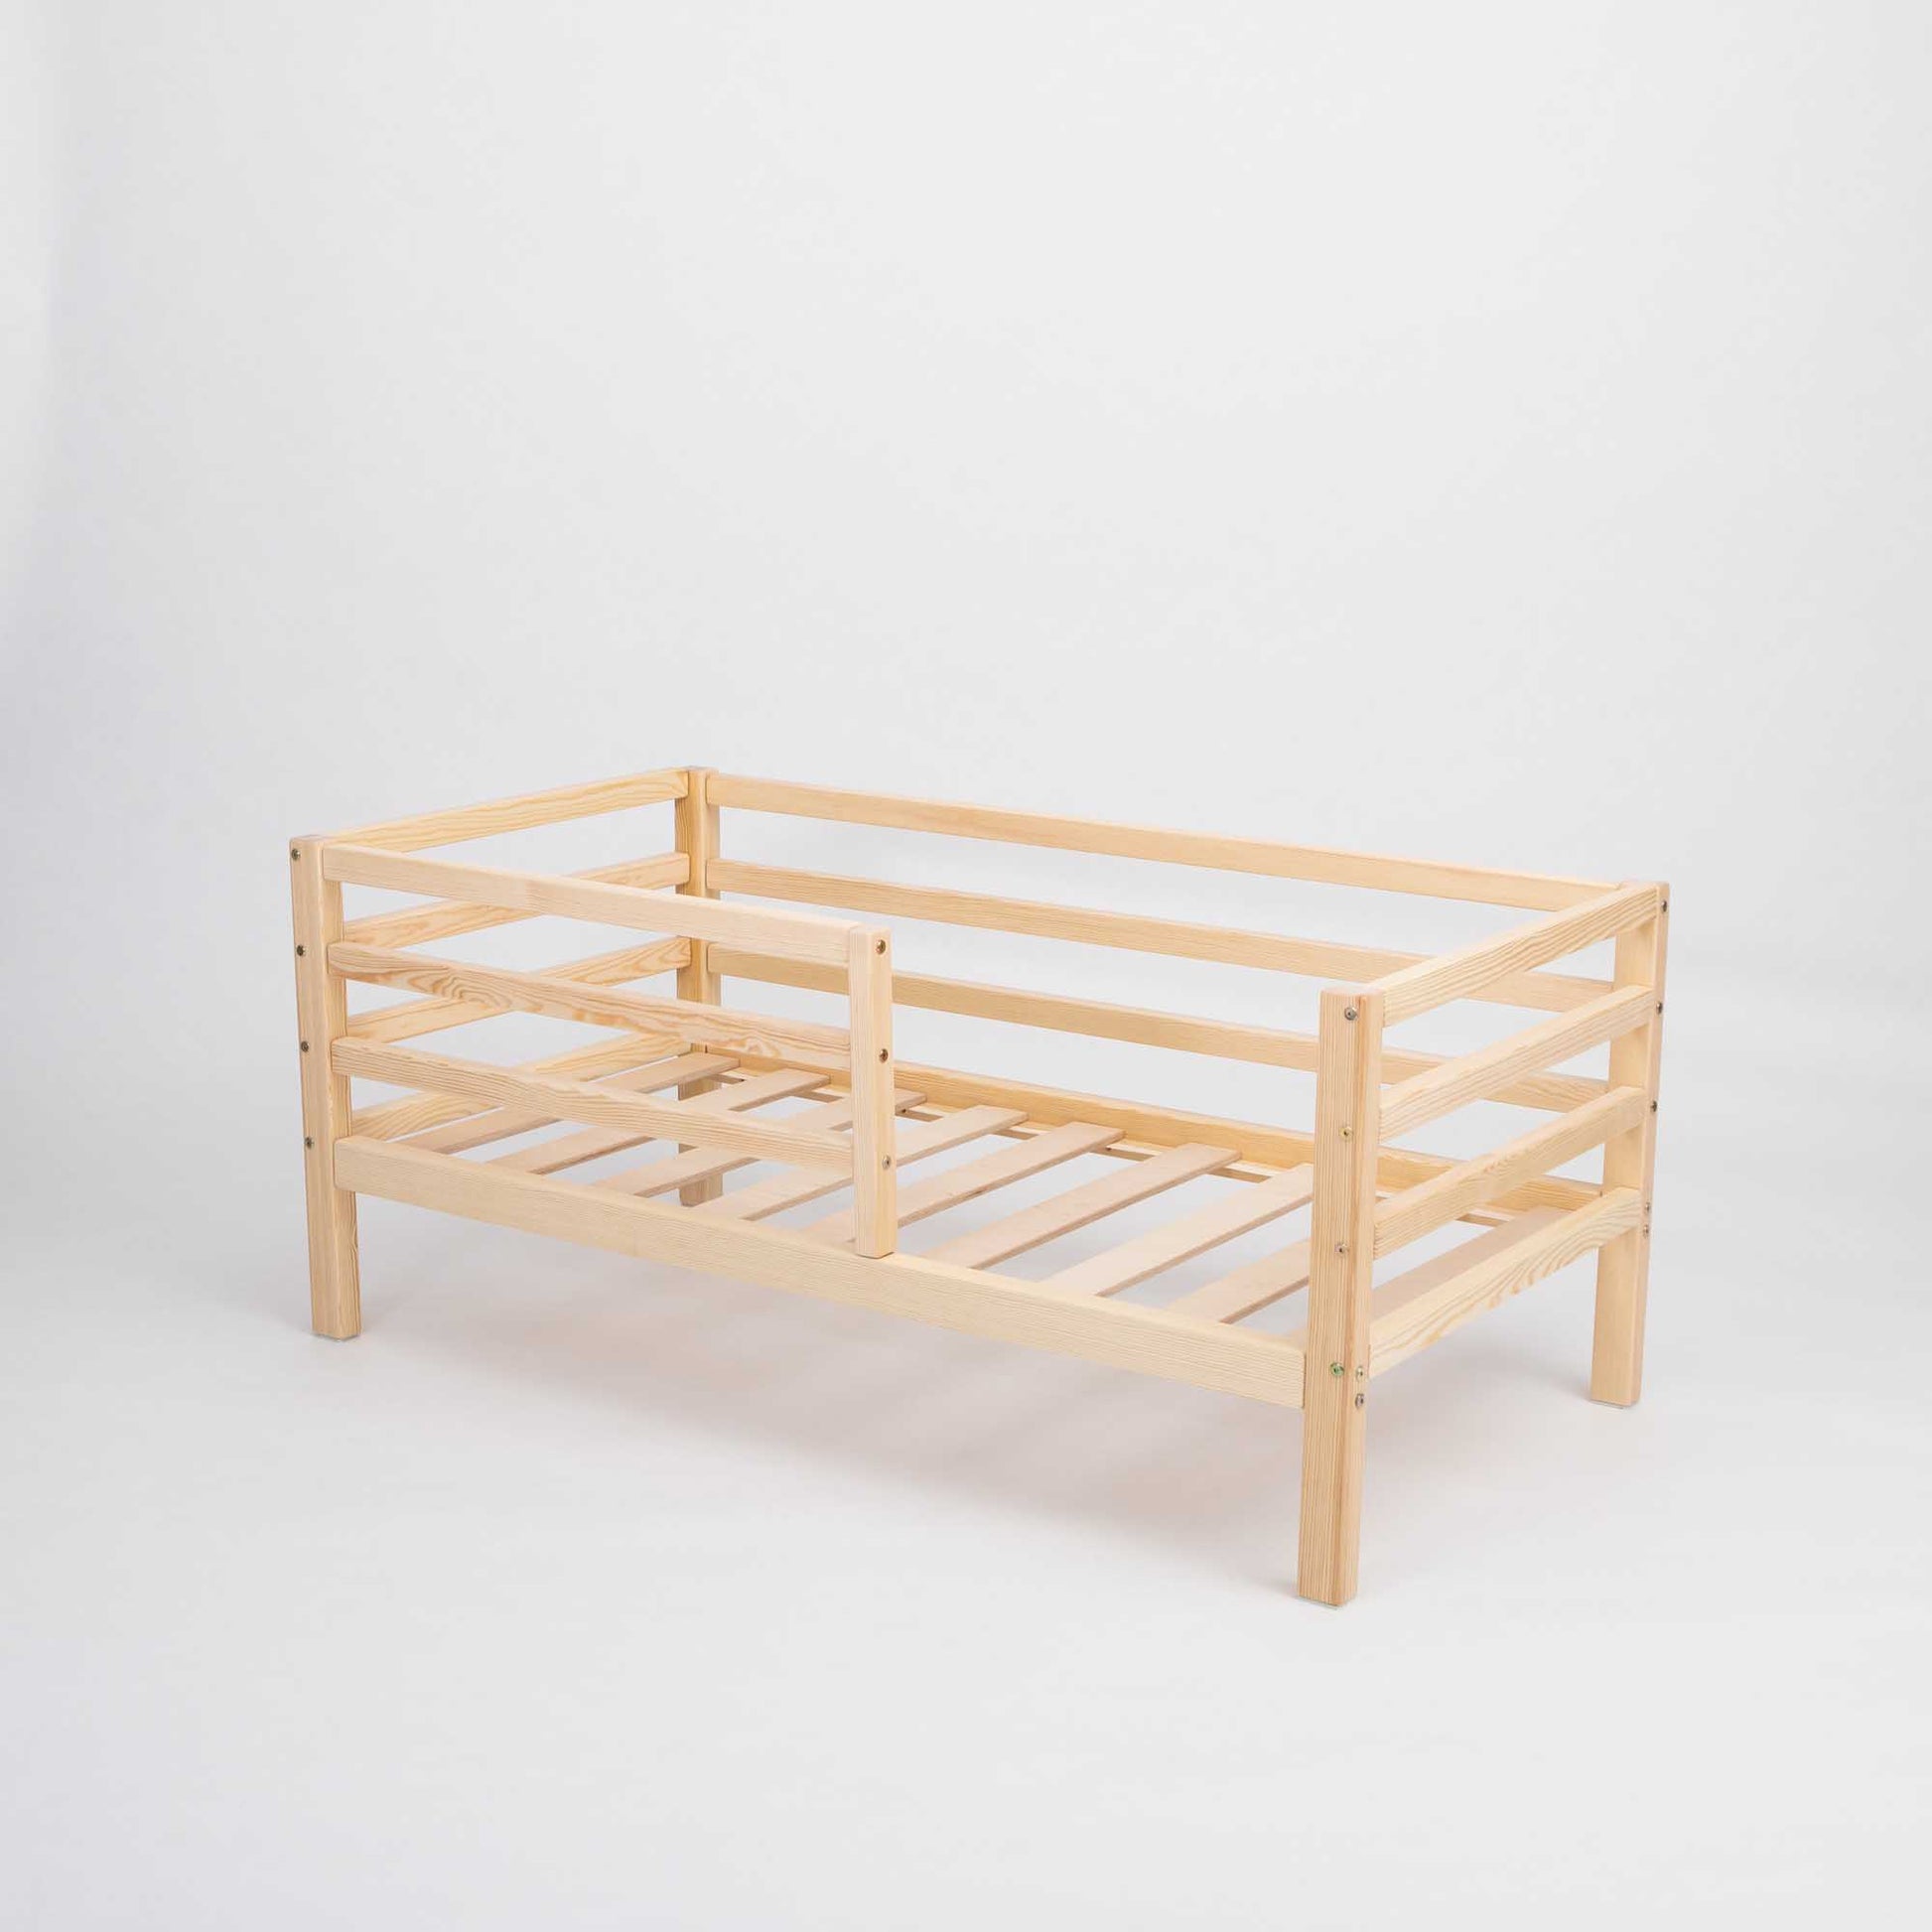 A Sweet Home From Wood Kids' bed on legs with a horizontal rail fence and slatted frame.